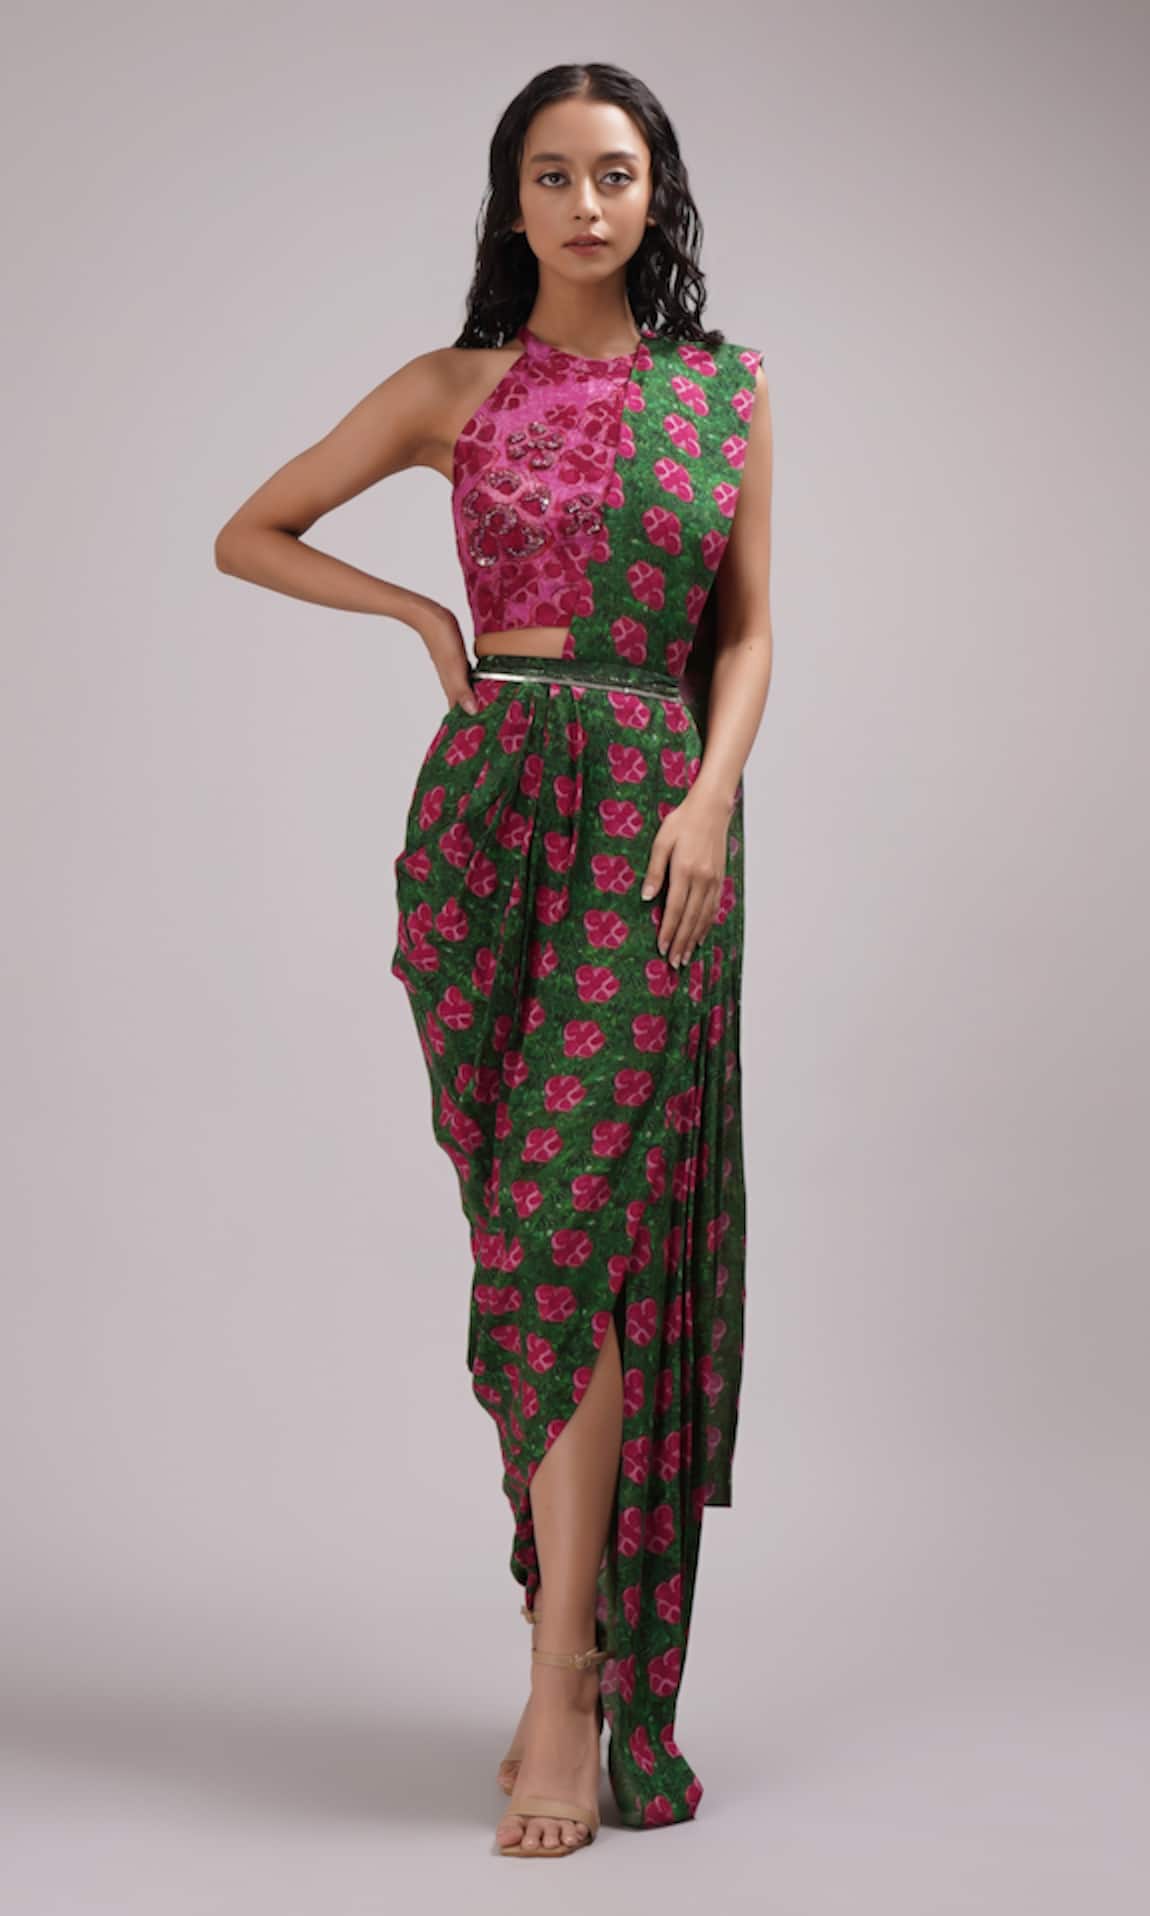 Breathe by Aakanksha Singh Redbud Floral Print Pre-Draped Saree With Blouse